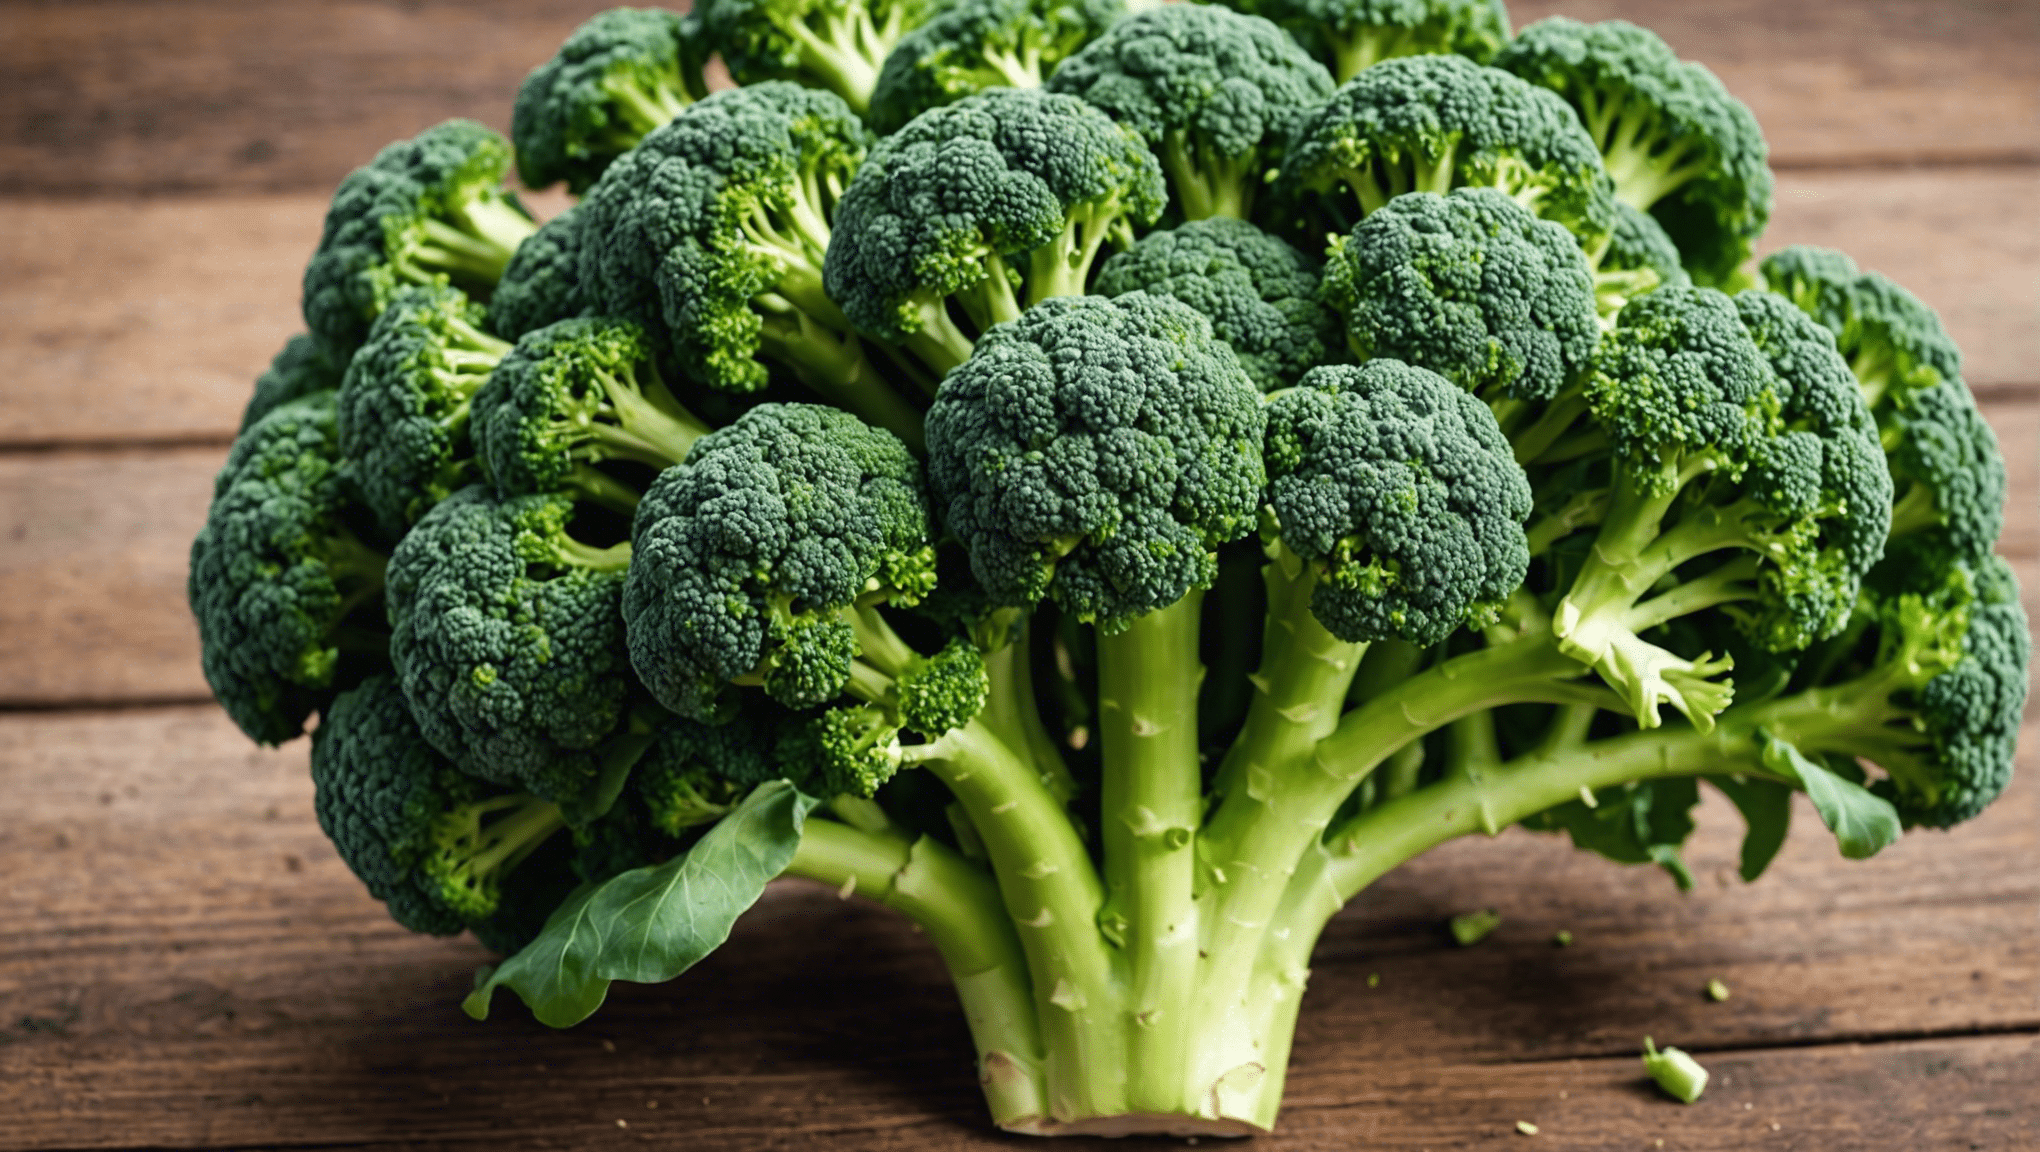 discover the reasons behind the popularity of broccoli seeds in health trends and their potential health benefits.